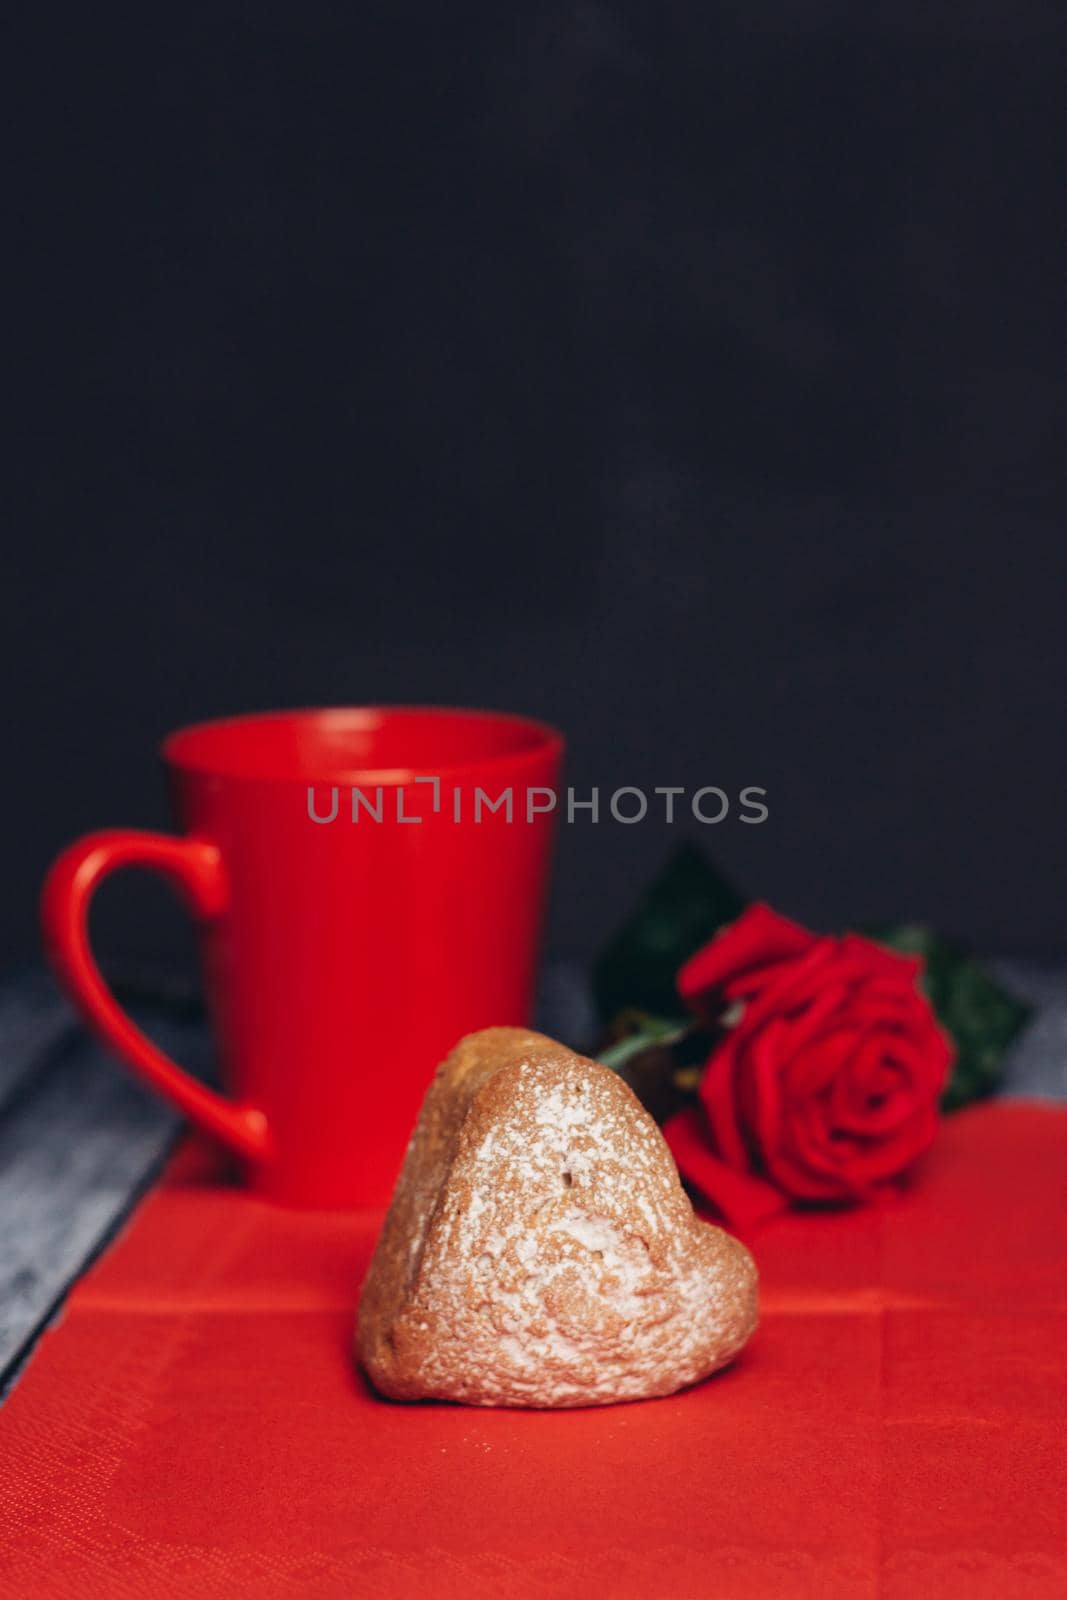 heart-shaped cookies on a red napkin rose flower snack by SHOTPRIME